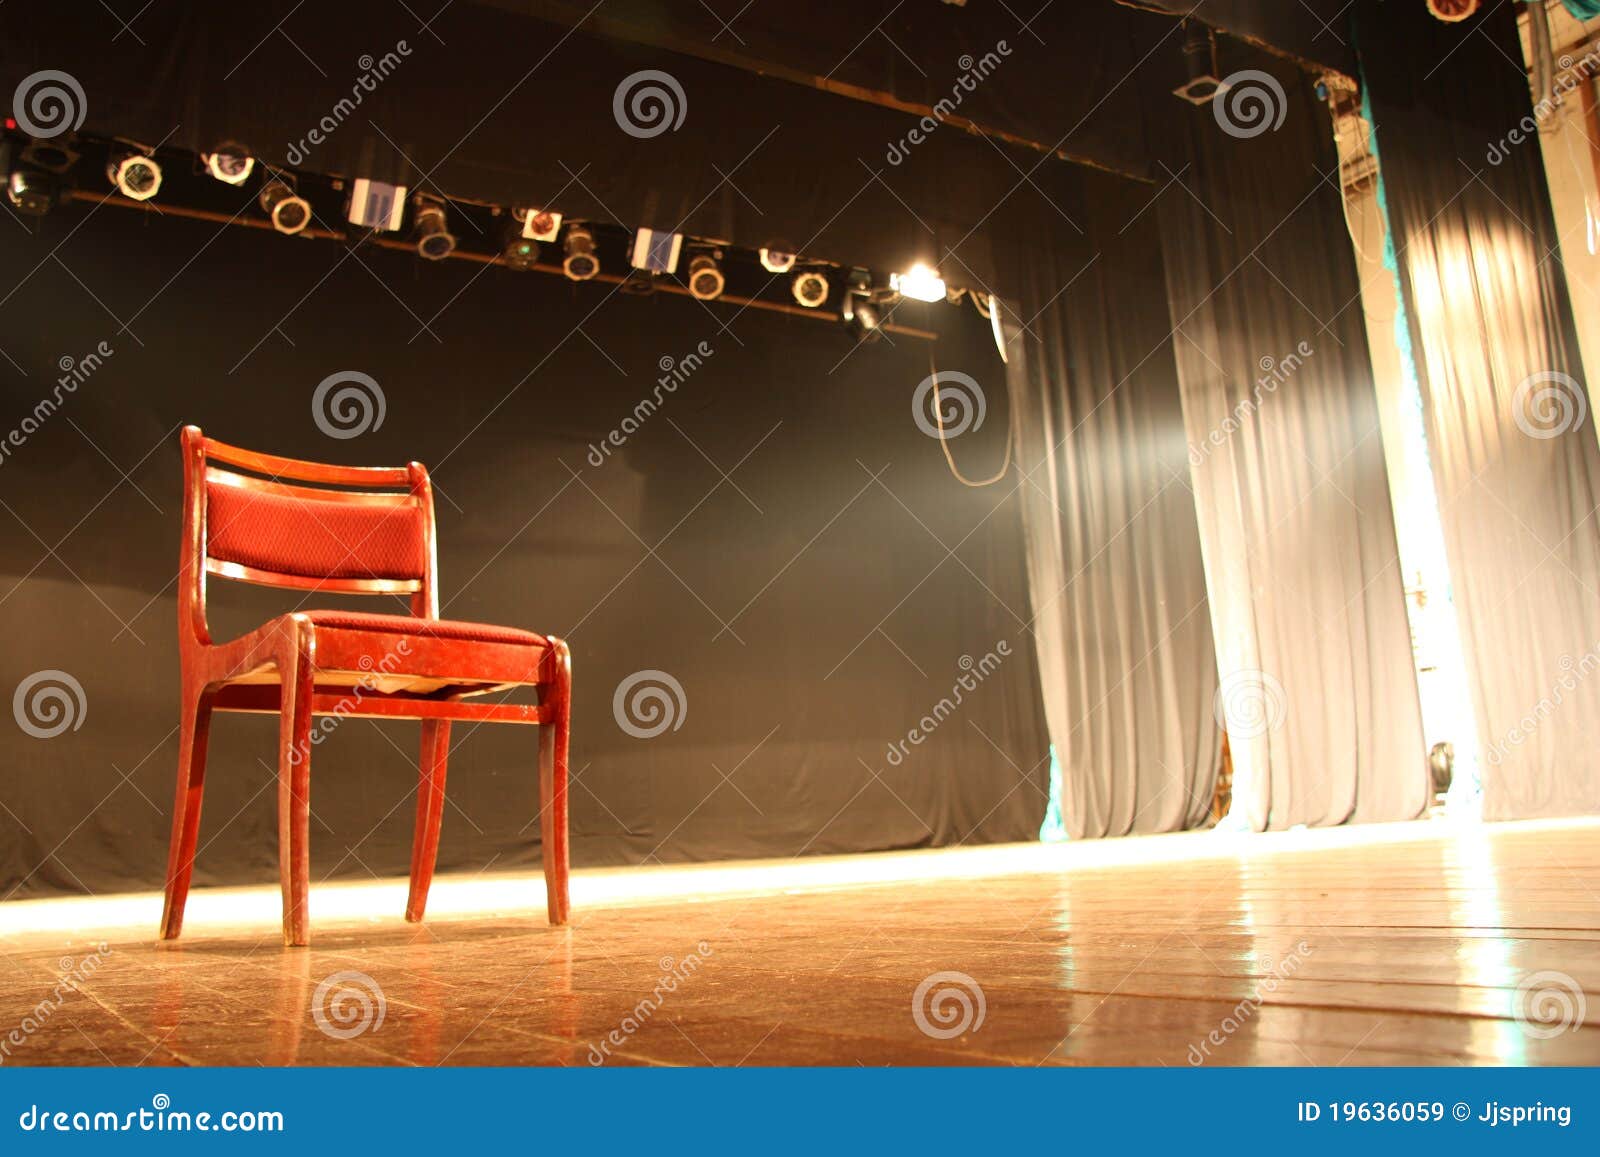 chair on empty theatre stage